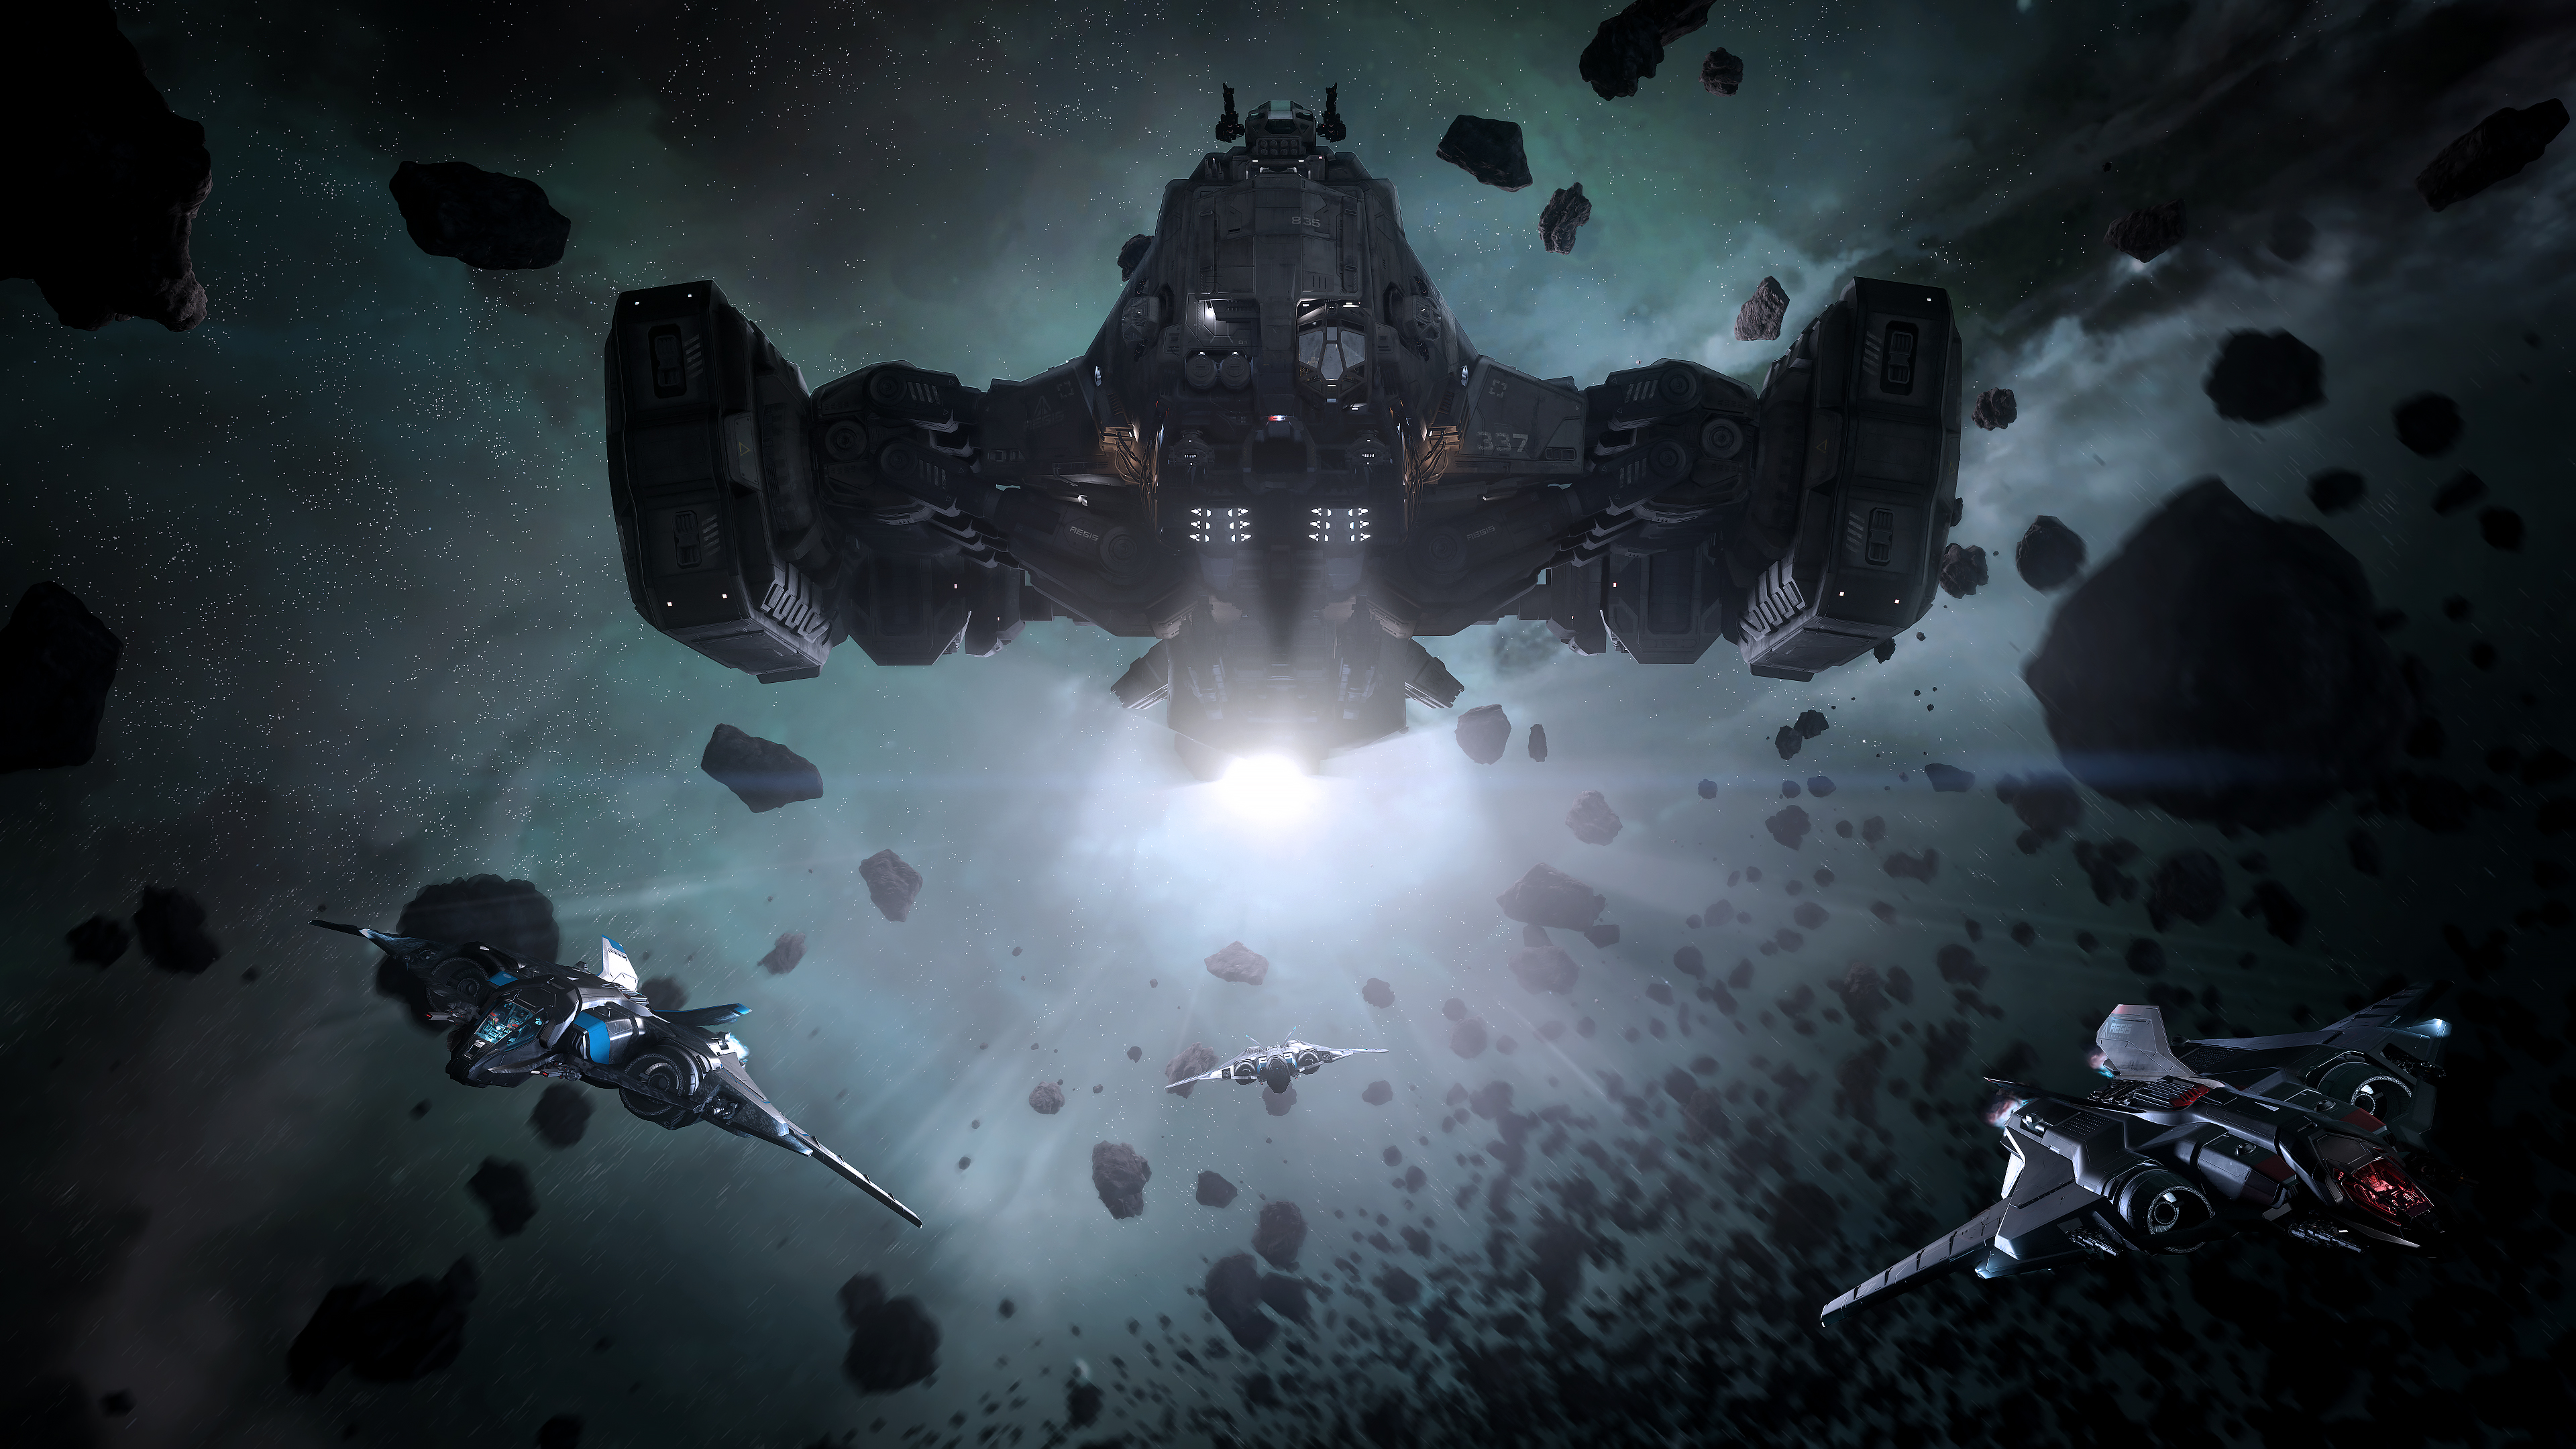 Star Citizen FreeFly This Week!